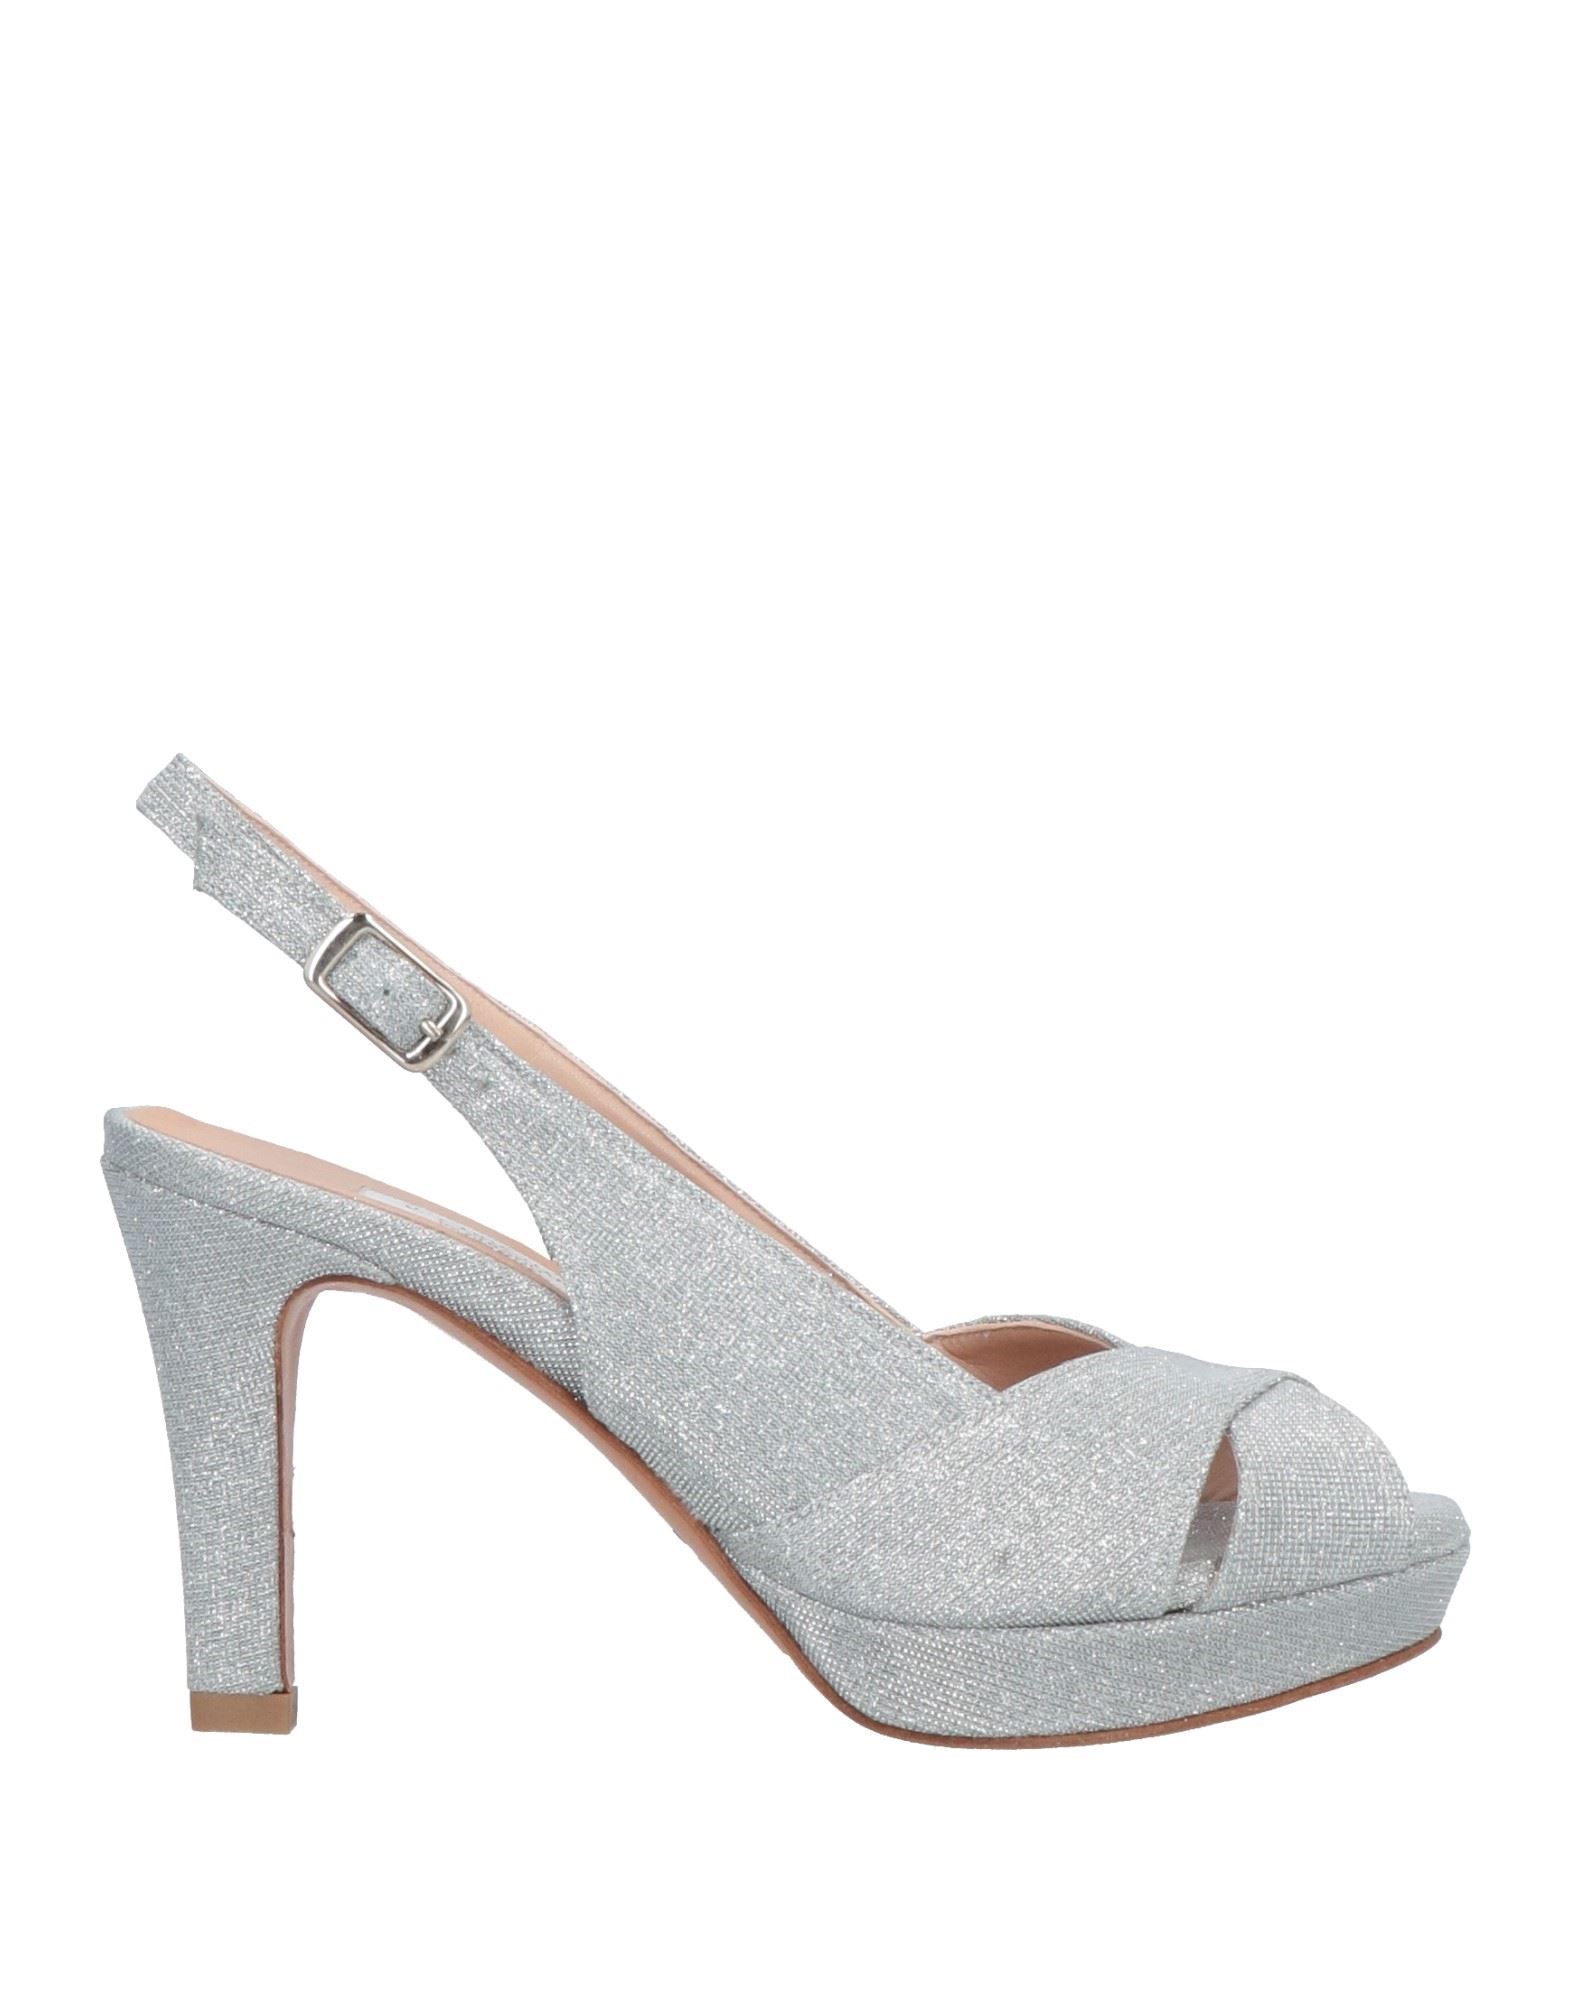 L'amour By Albano Sandals In Silver